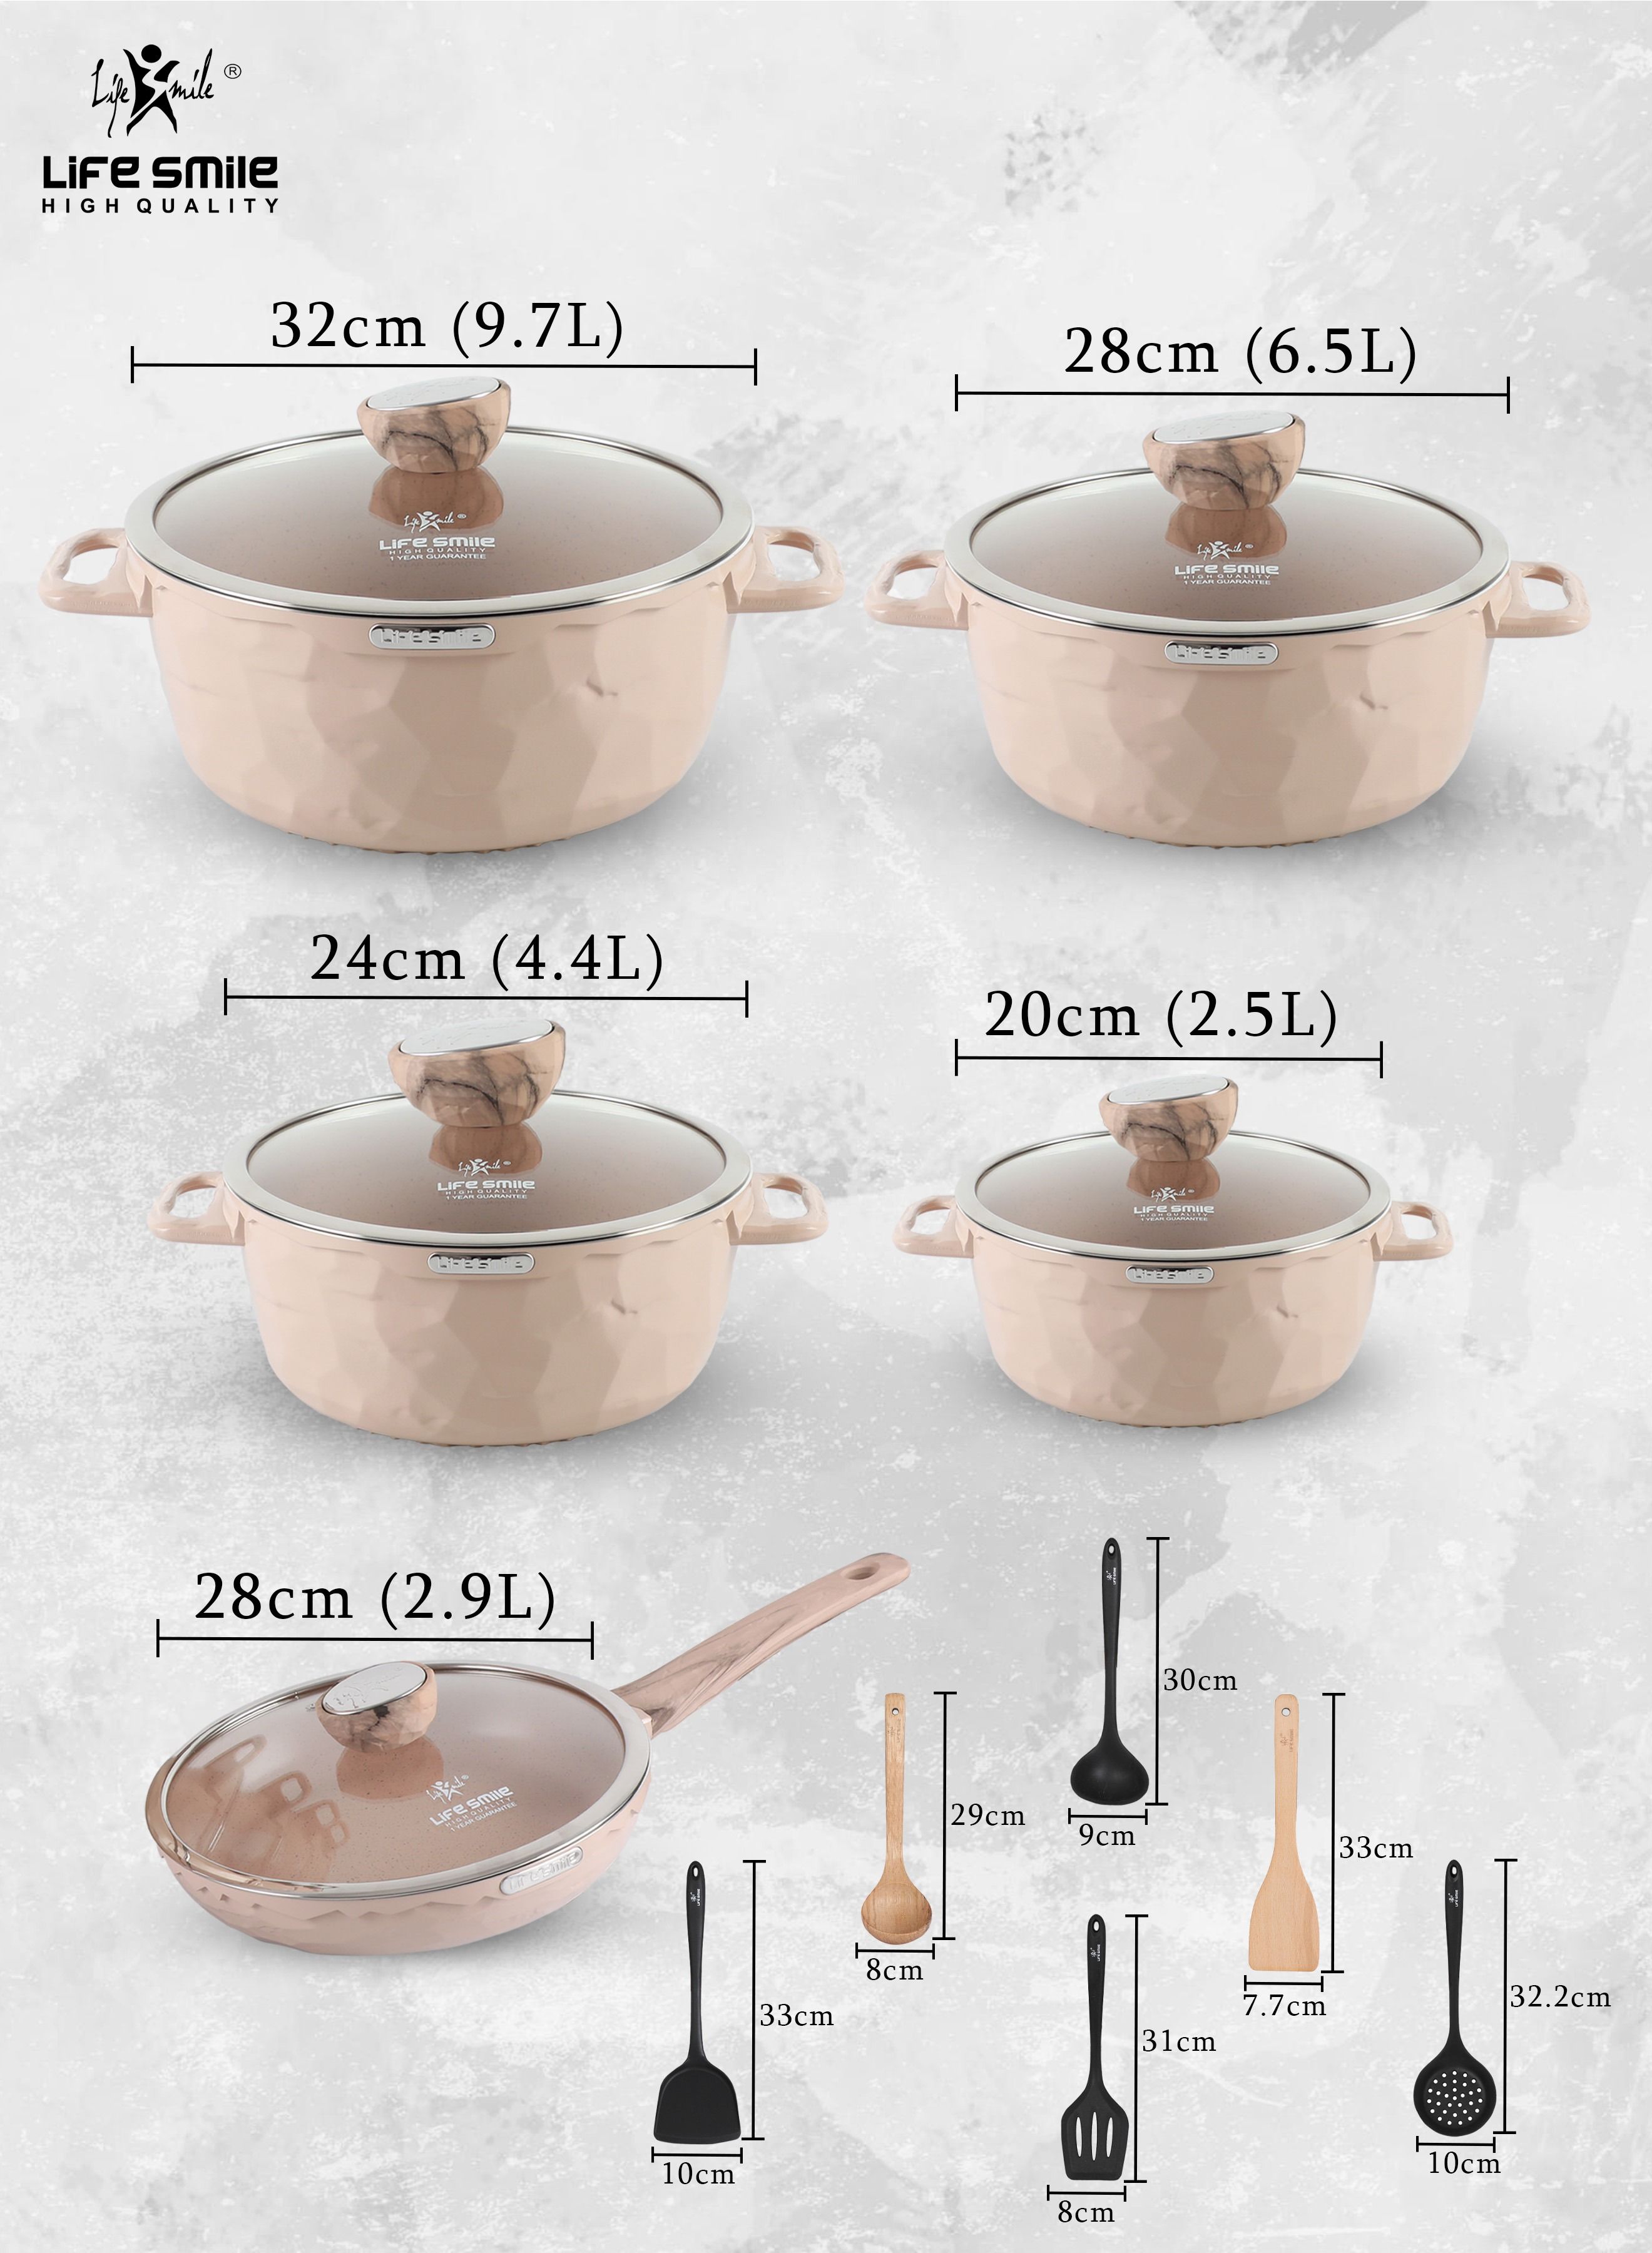 16Pcs Granite Coated Healthy Cookware Set - Die Cast Aluminum Cooking Casserrole Set Inclued Sauce & Stock Pots, French Frying Pan - Nylon and Wooden Tools 